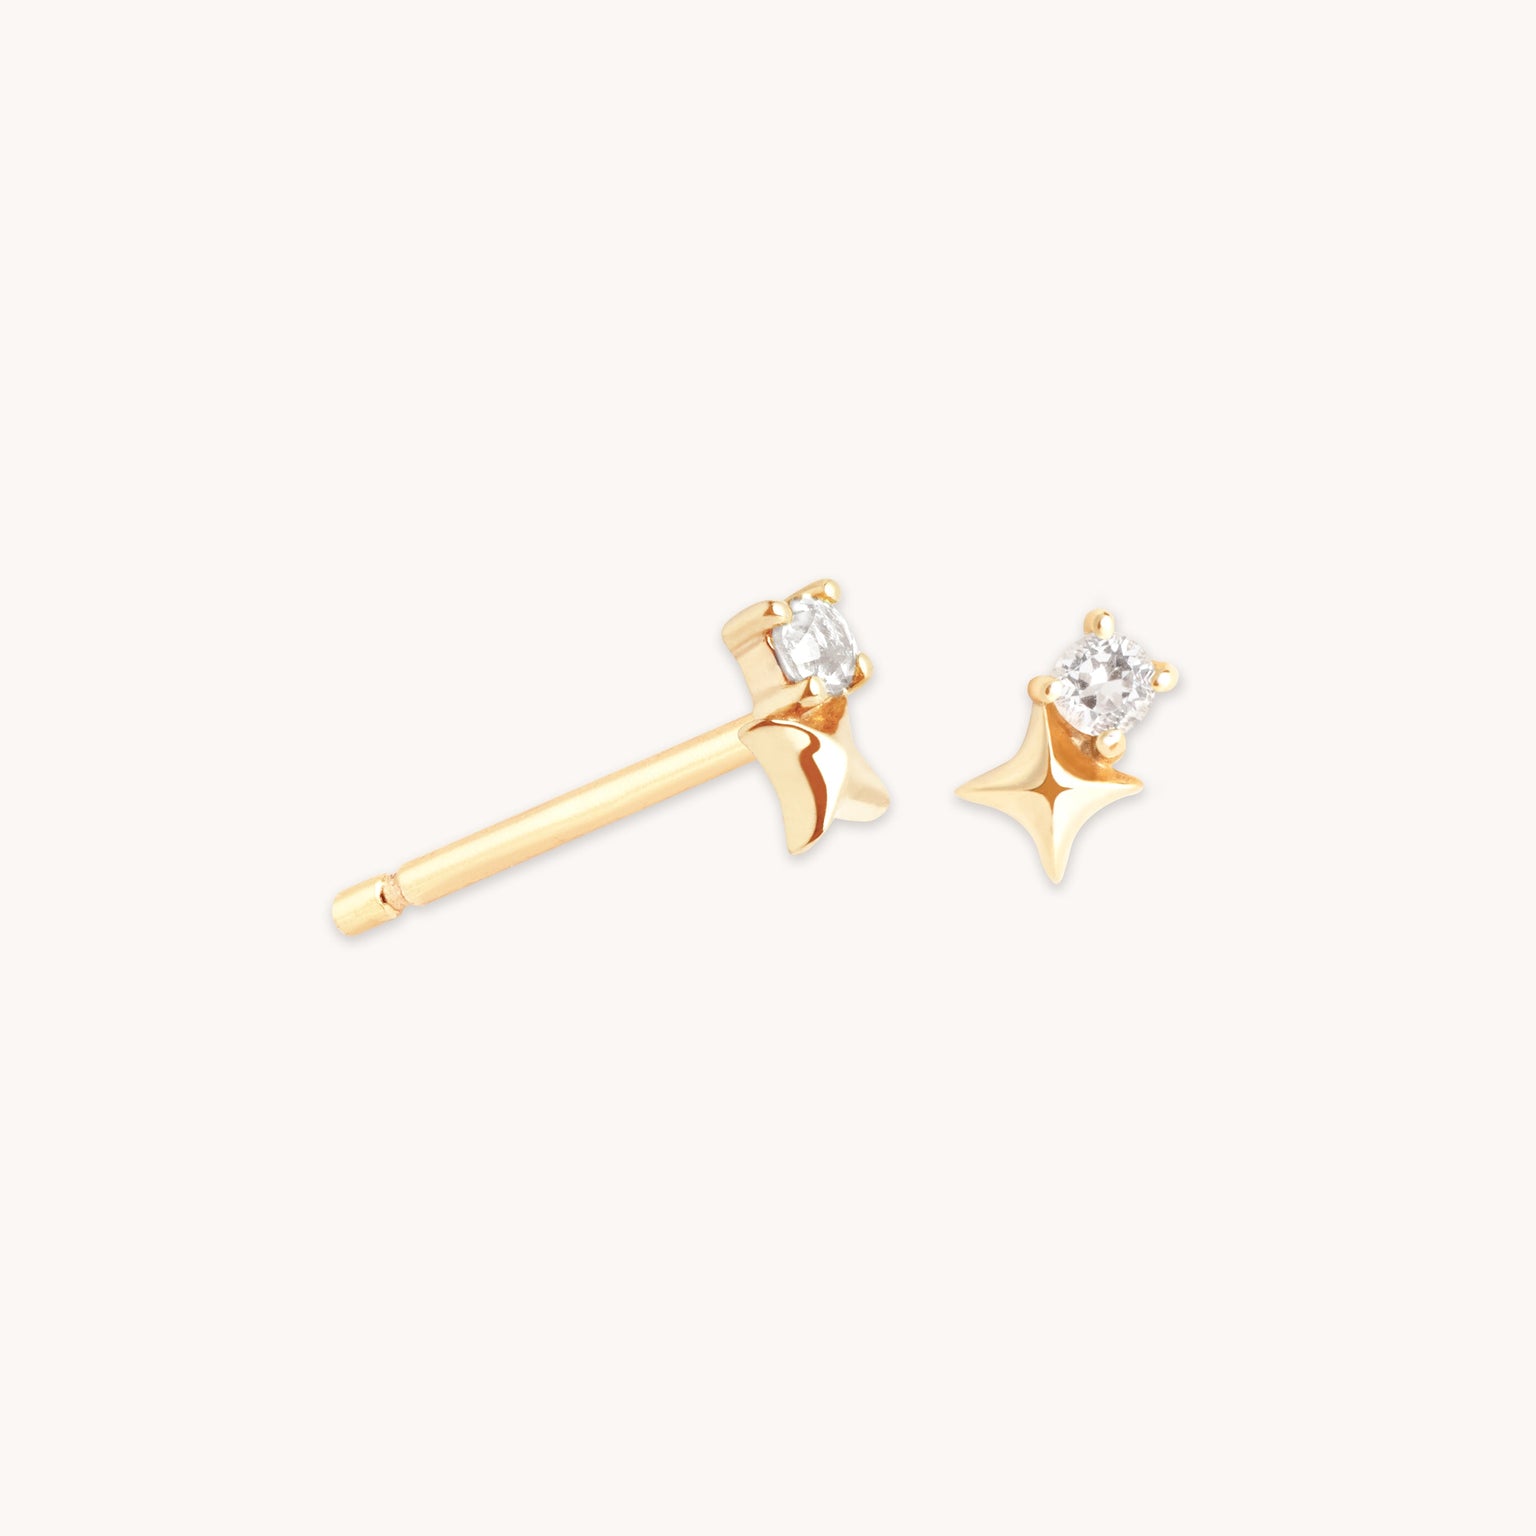 April White Topaz Birthstone Earrings in Solid Gold